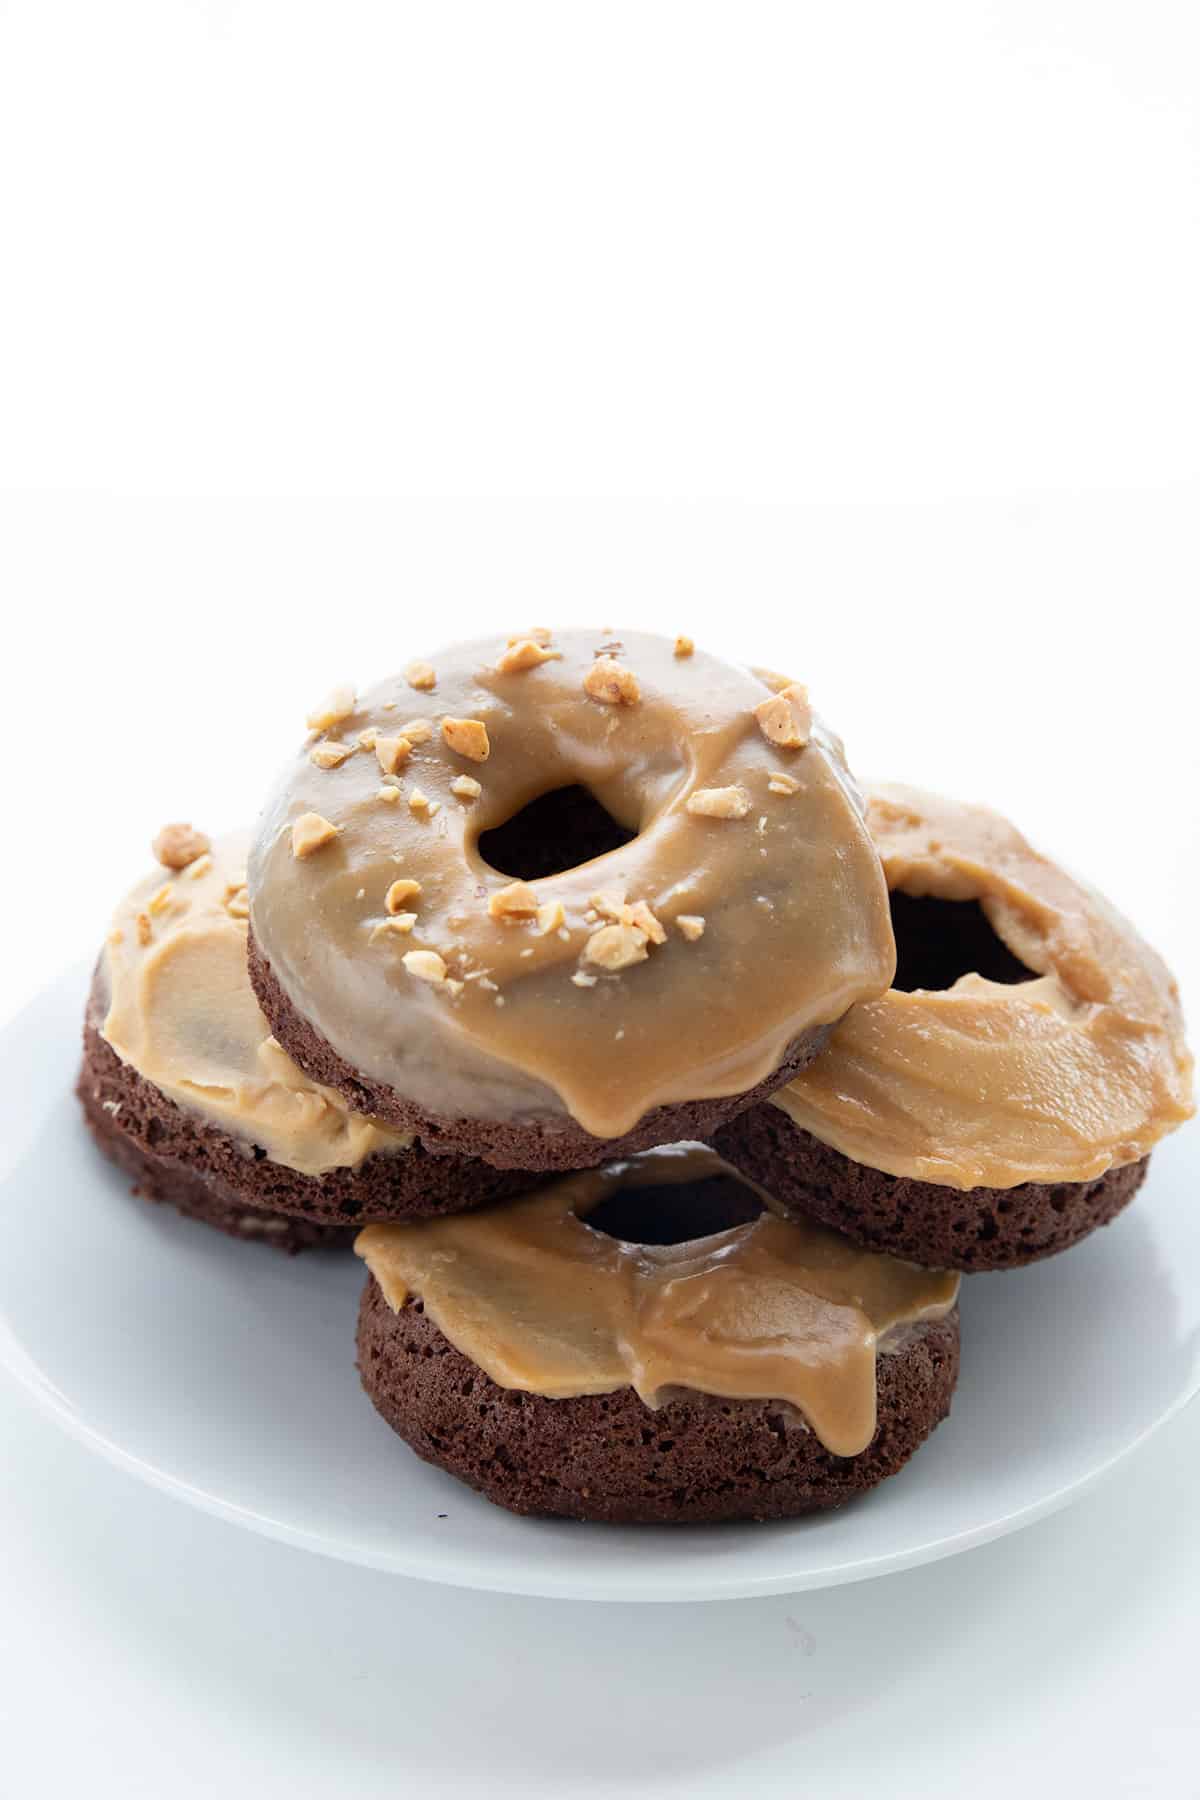 A stack of keto peanut butter donuts on a white plate.